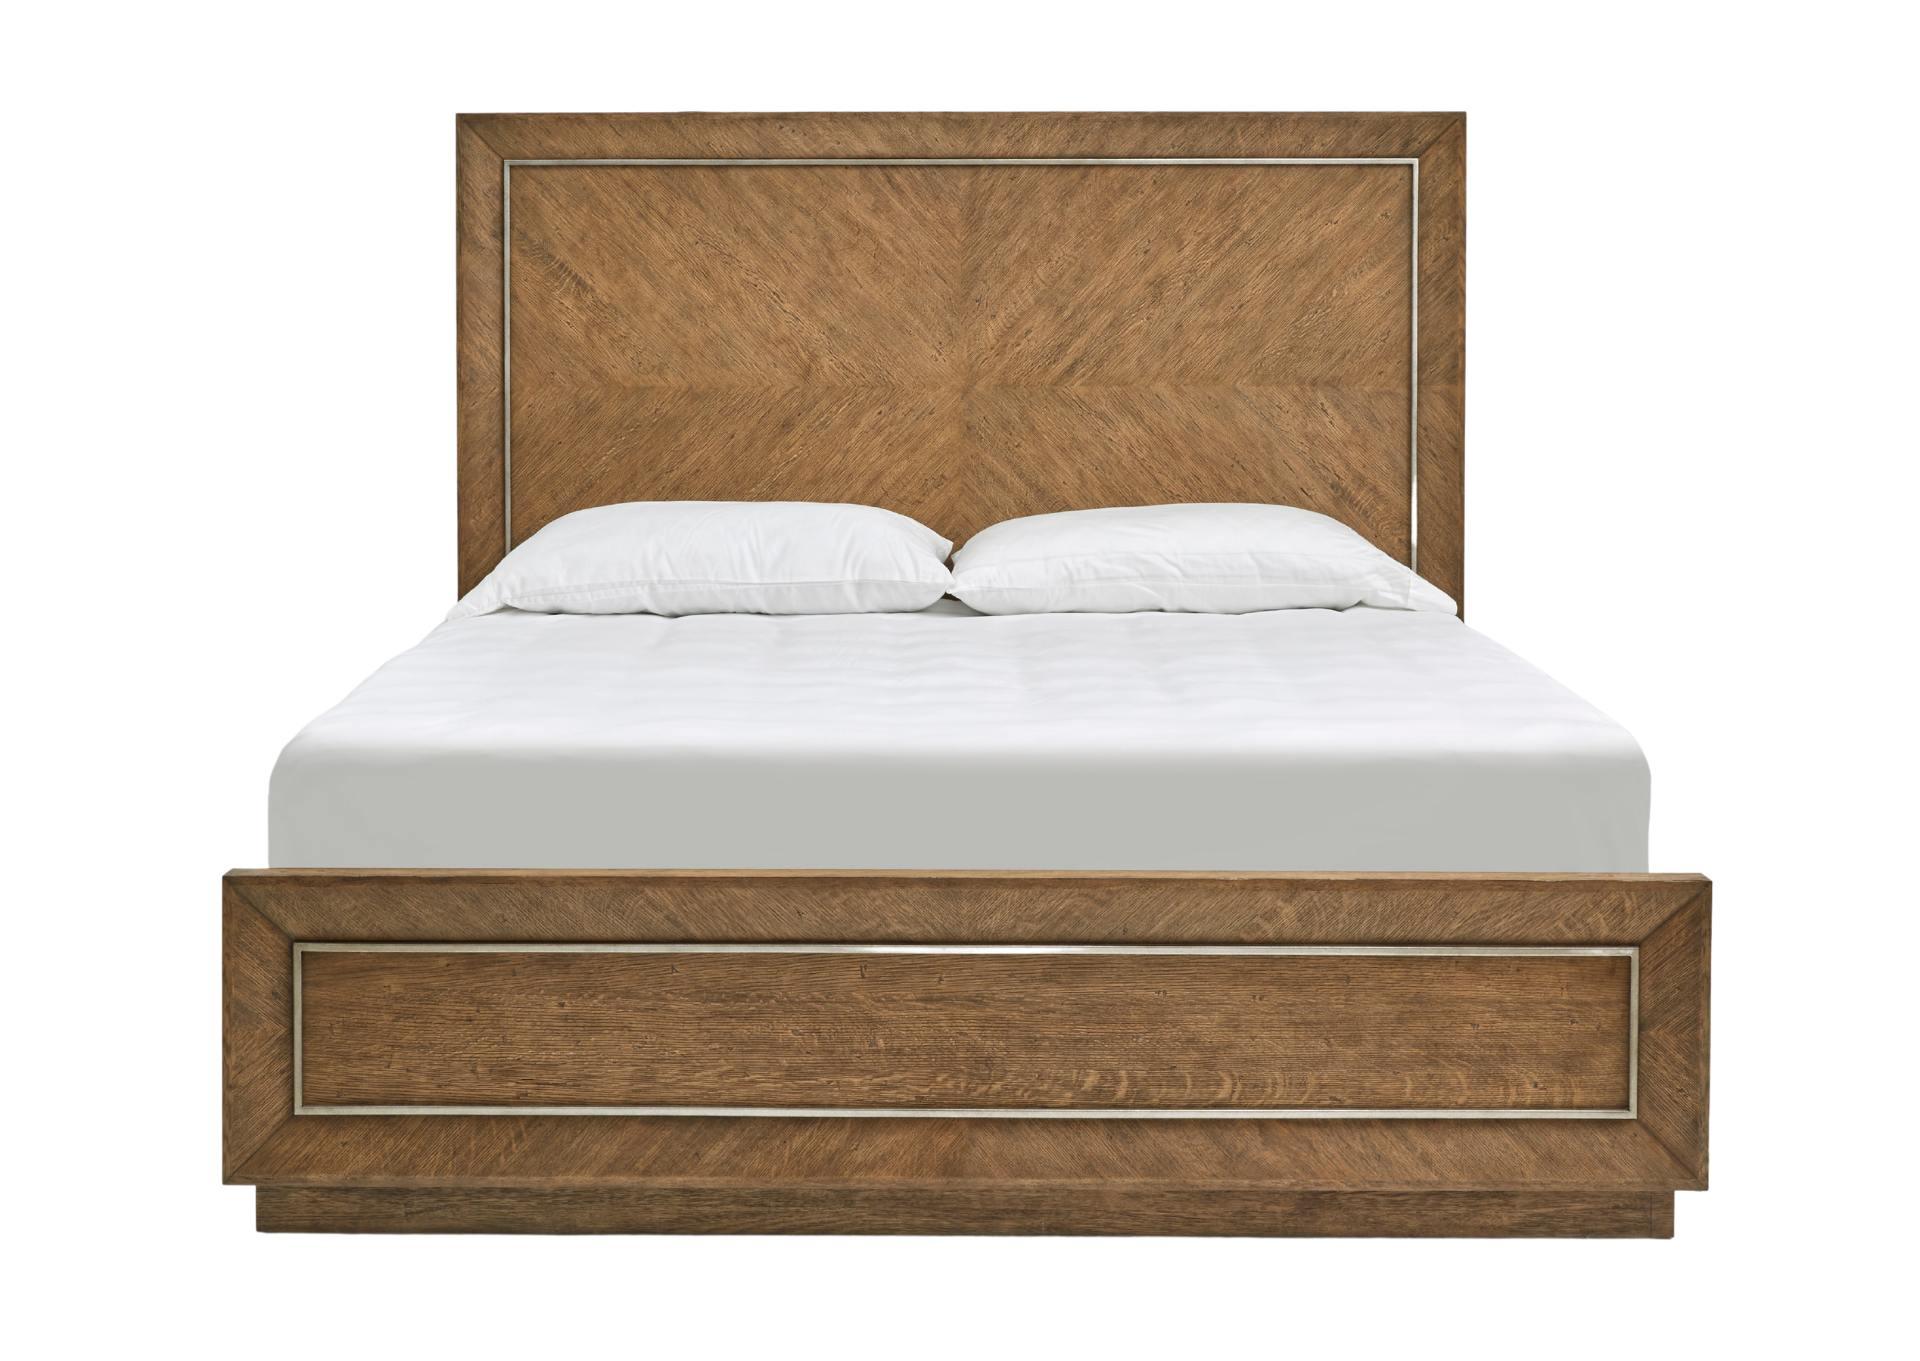 AMHERST LIGHT OAK KING PANEL BED,MAGS